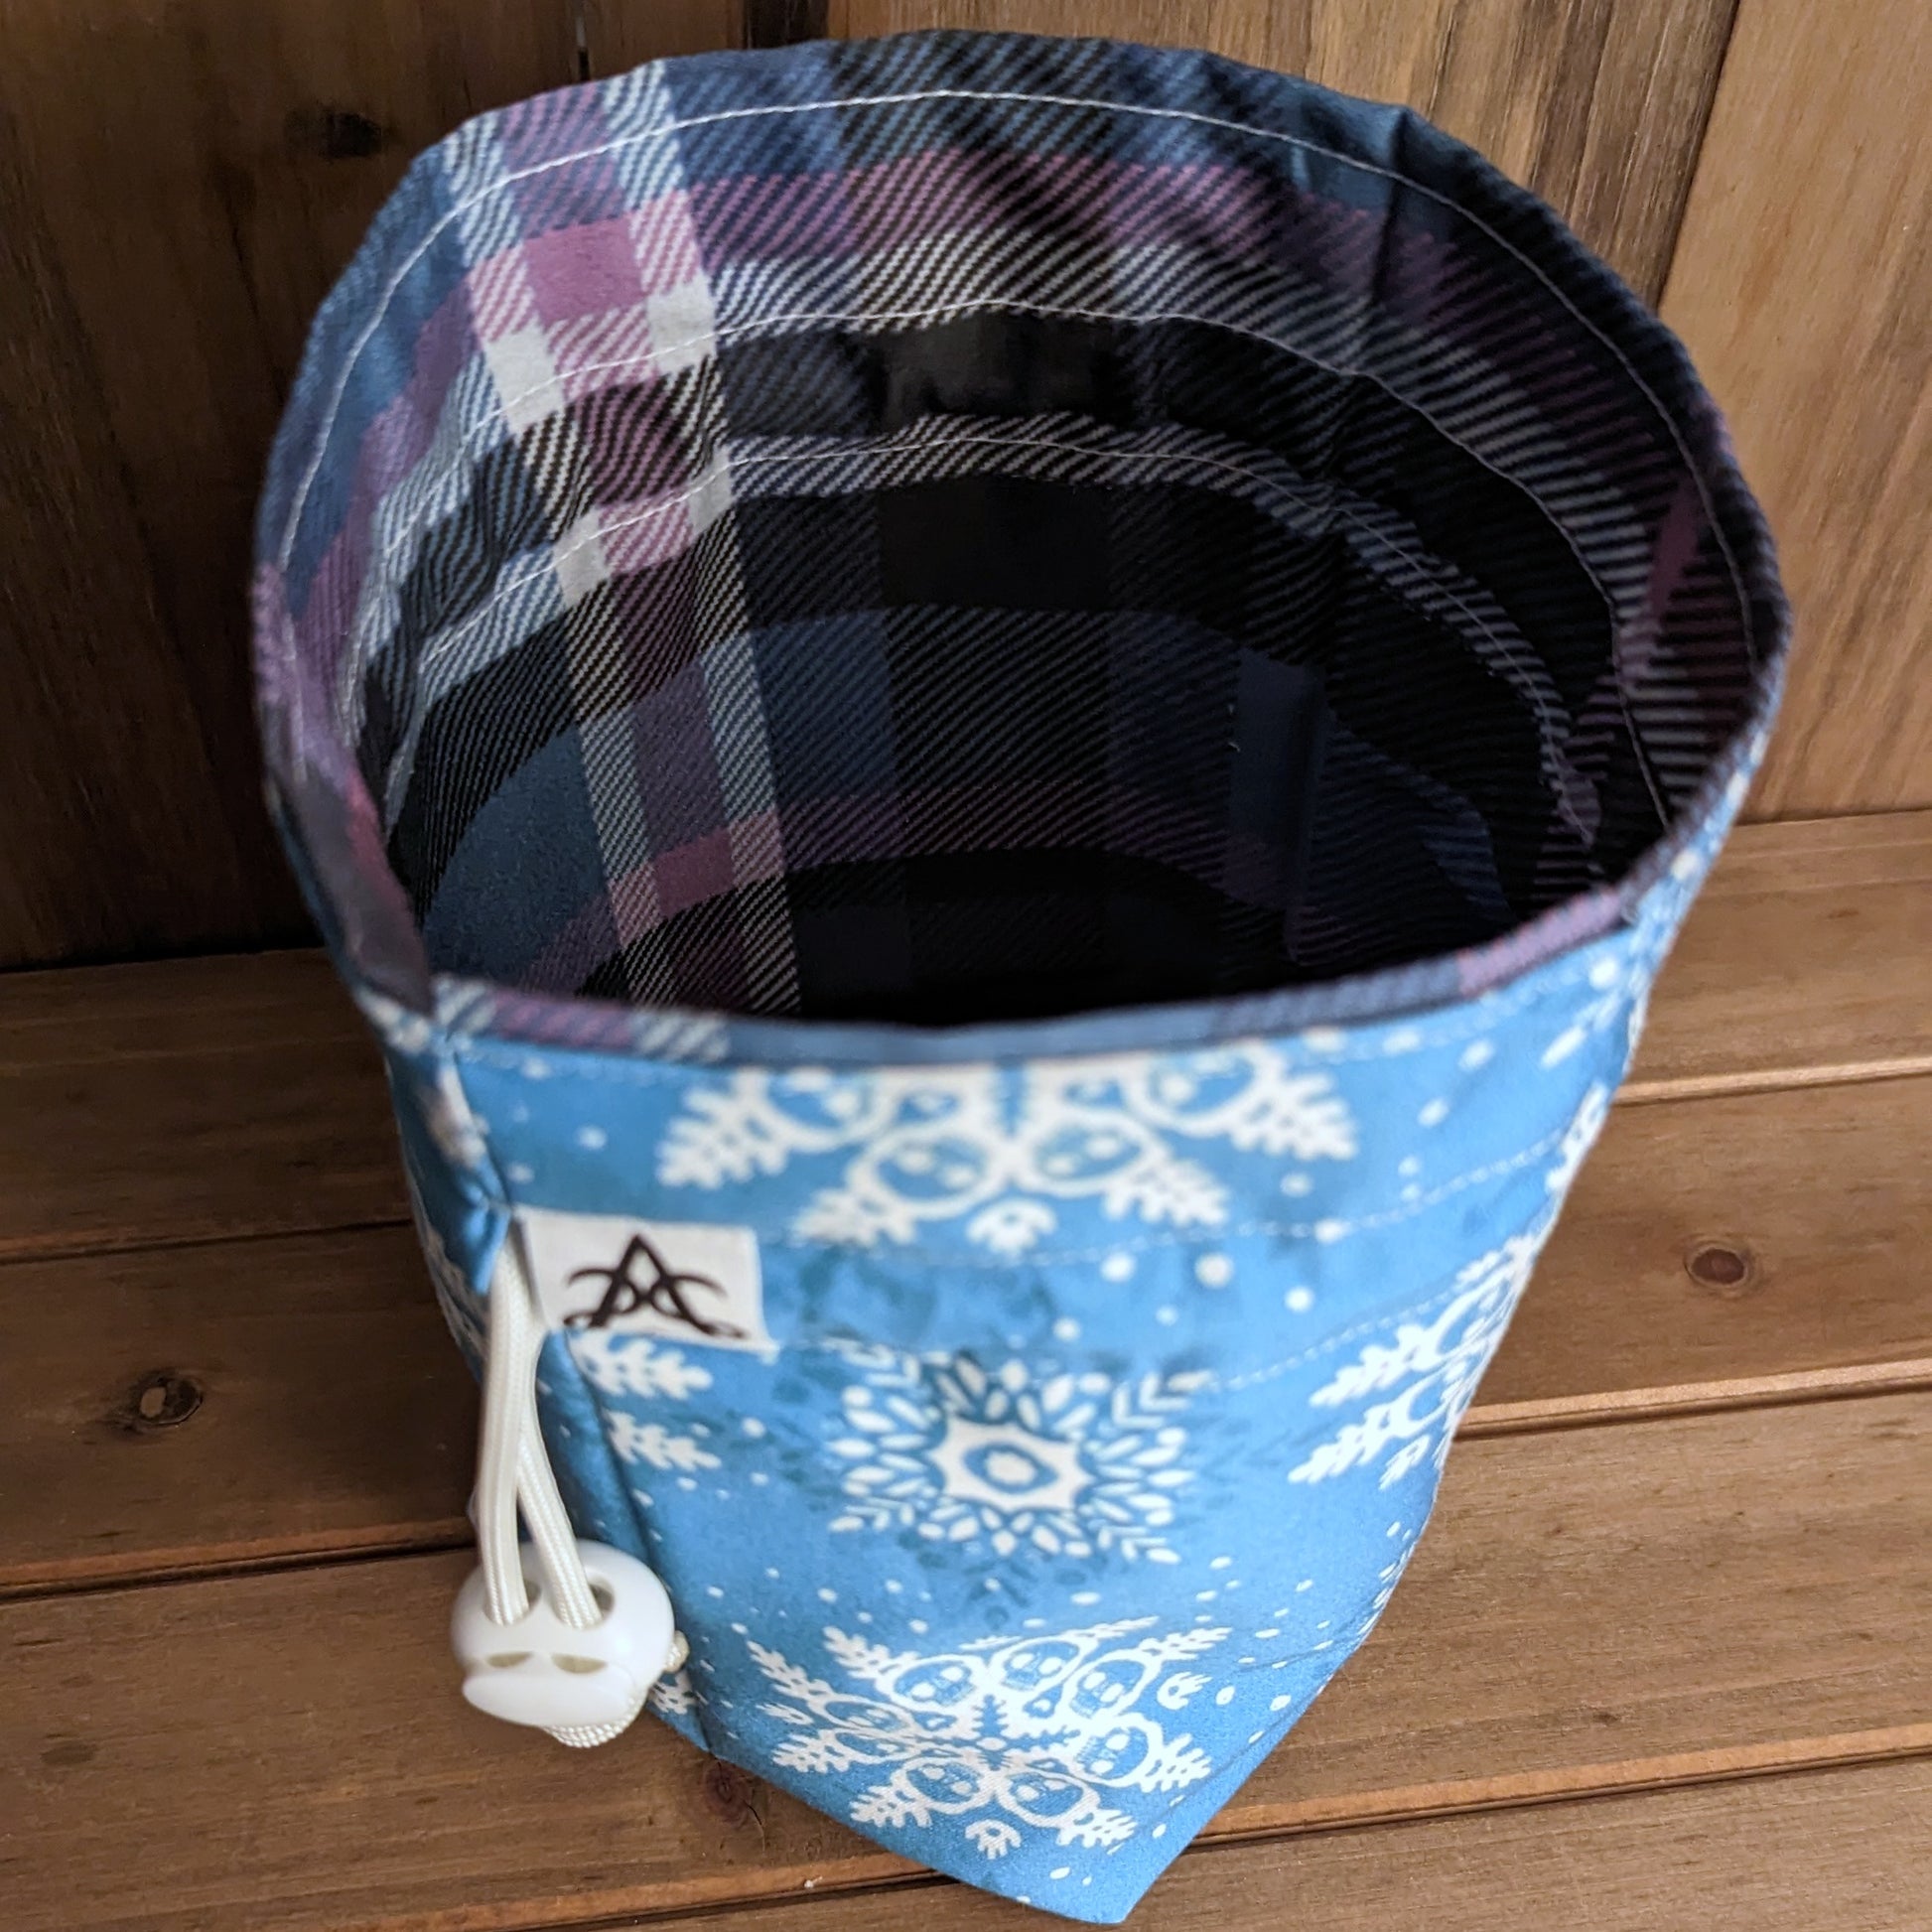 A drawstring bag with a square bottom stands up with a white skull snowflake pattern on light blue outside and a purple and blue plaid liner.